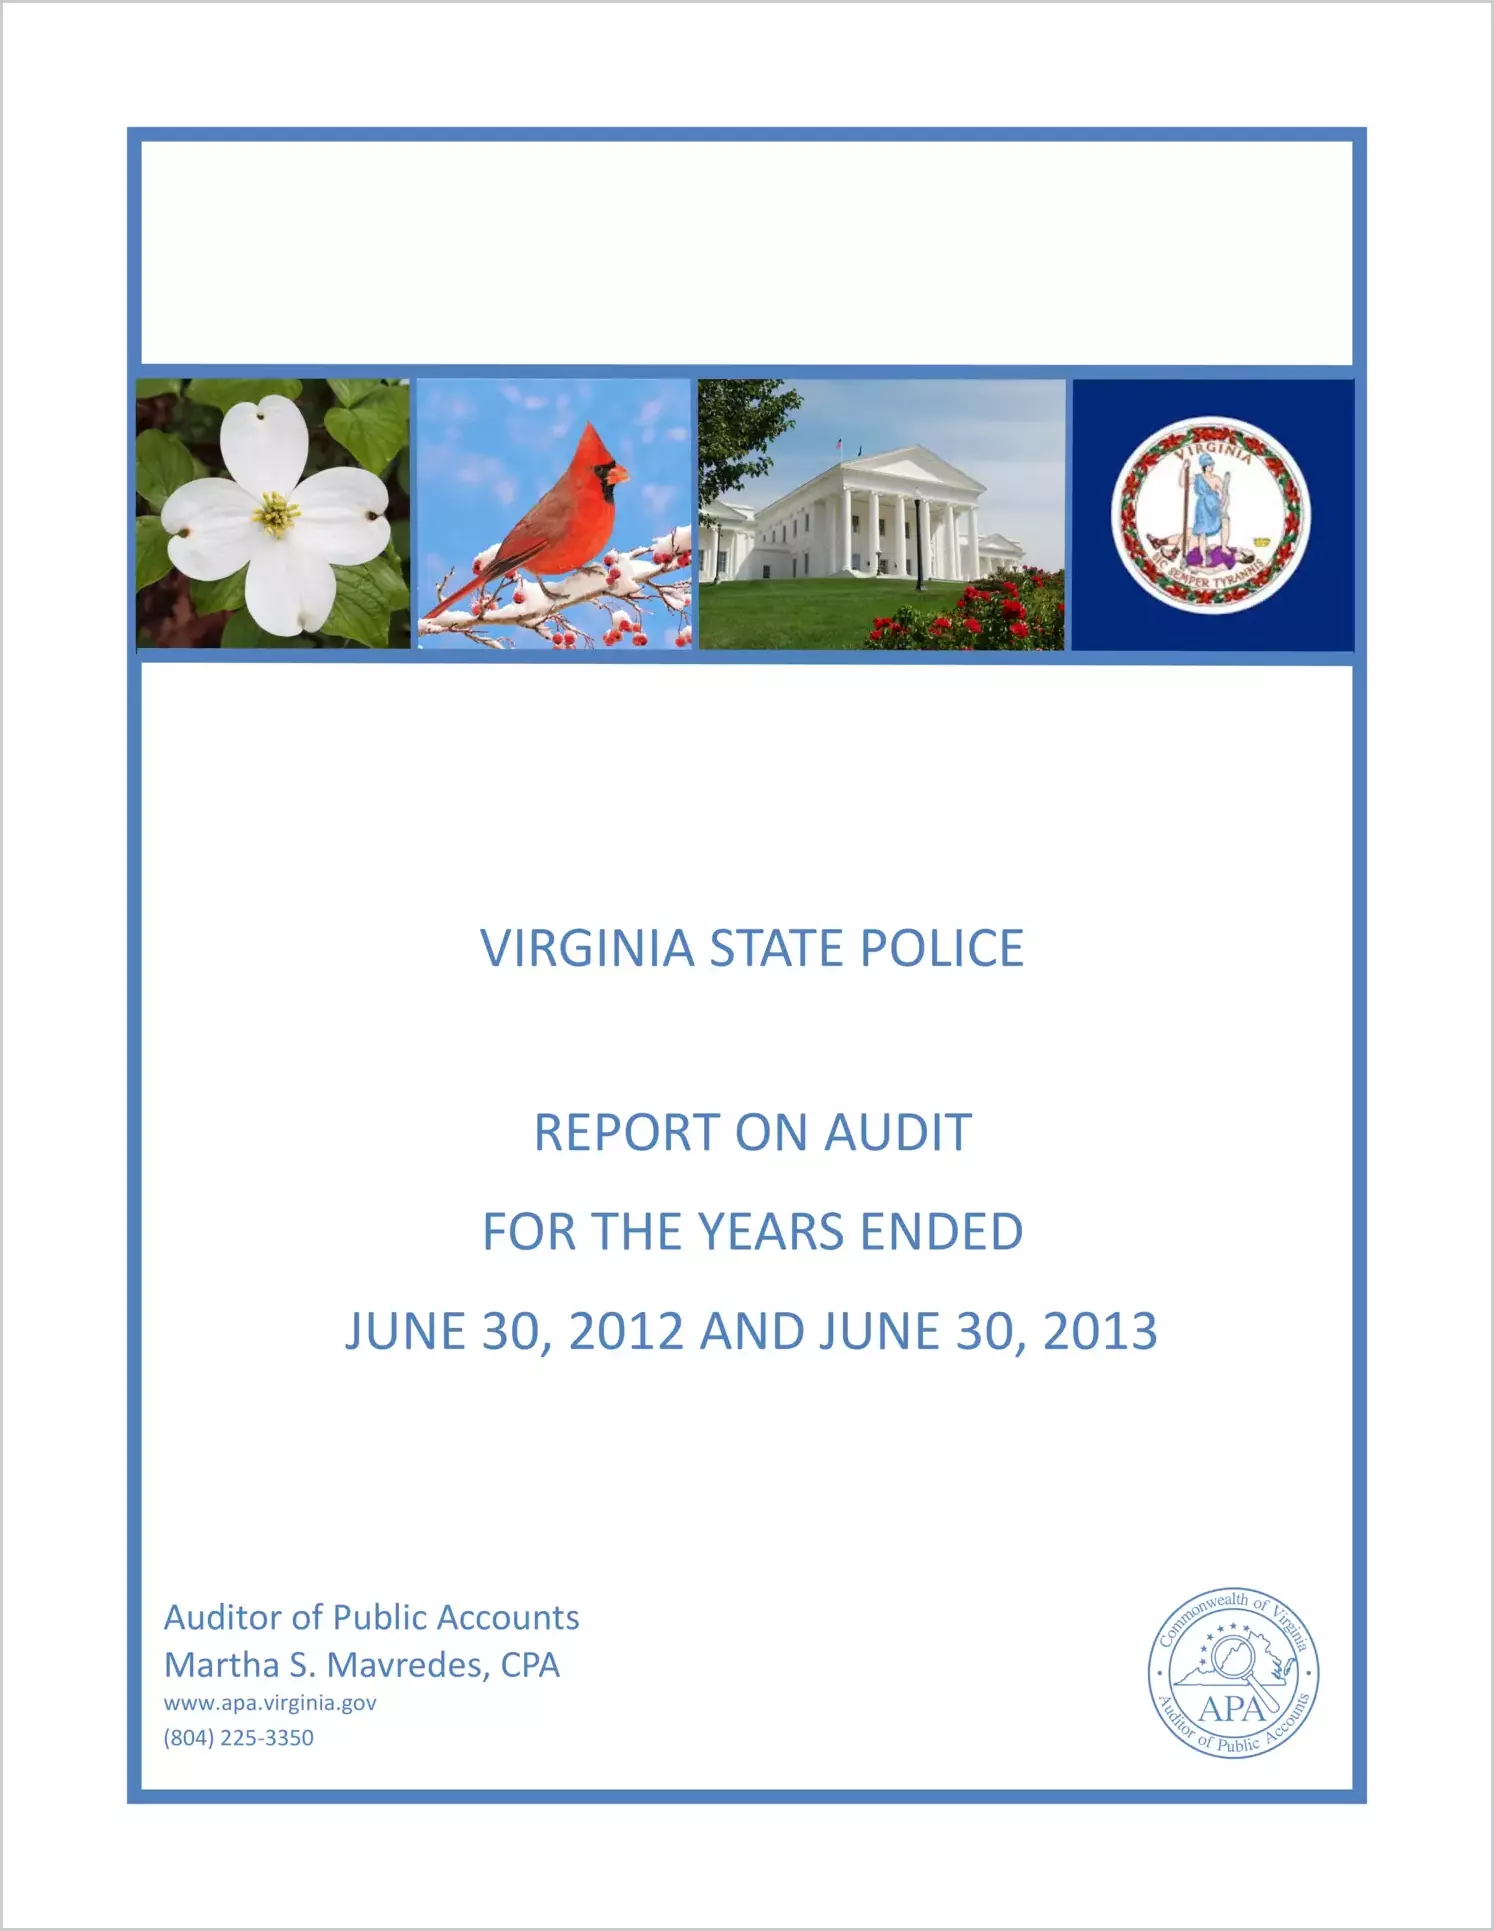 Virginia Department of State Police for the  years ended June 30, 2012 and June 30, 2013